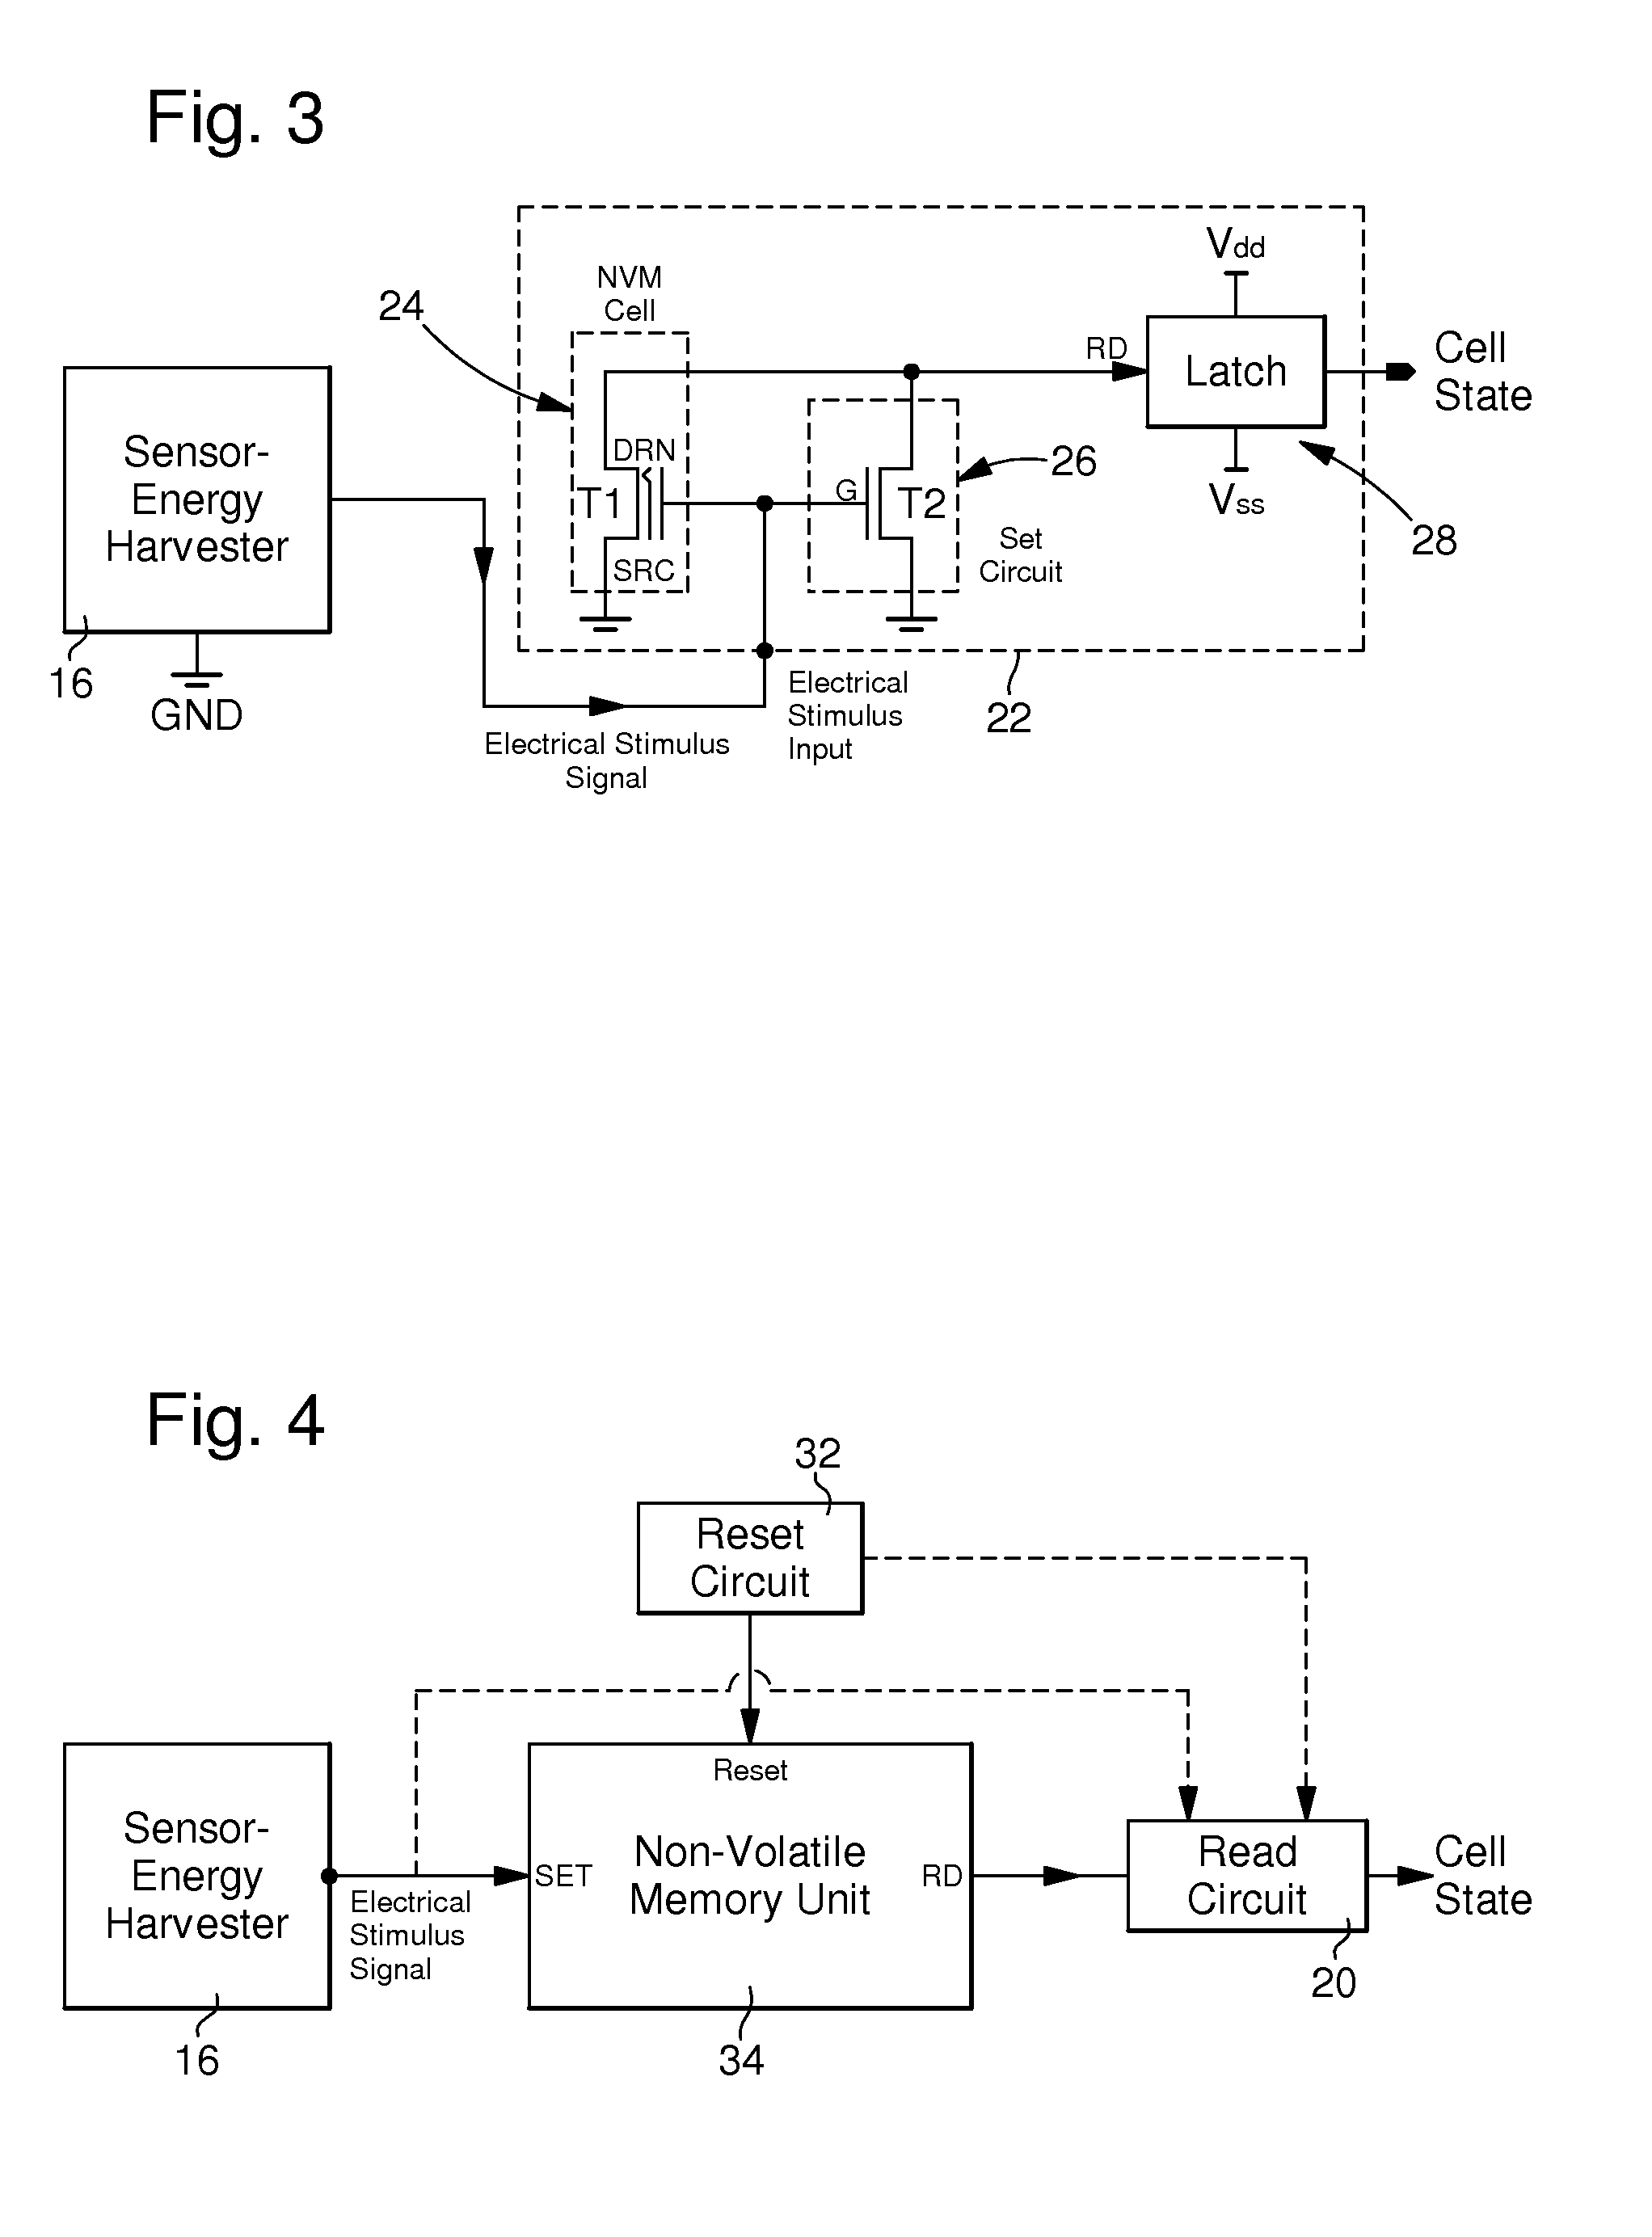 Self-powered detection device with a non-volatile memory